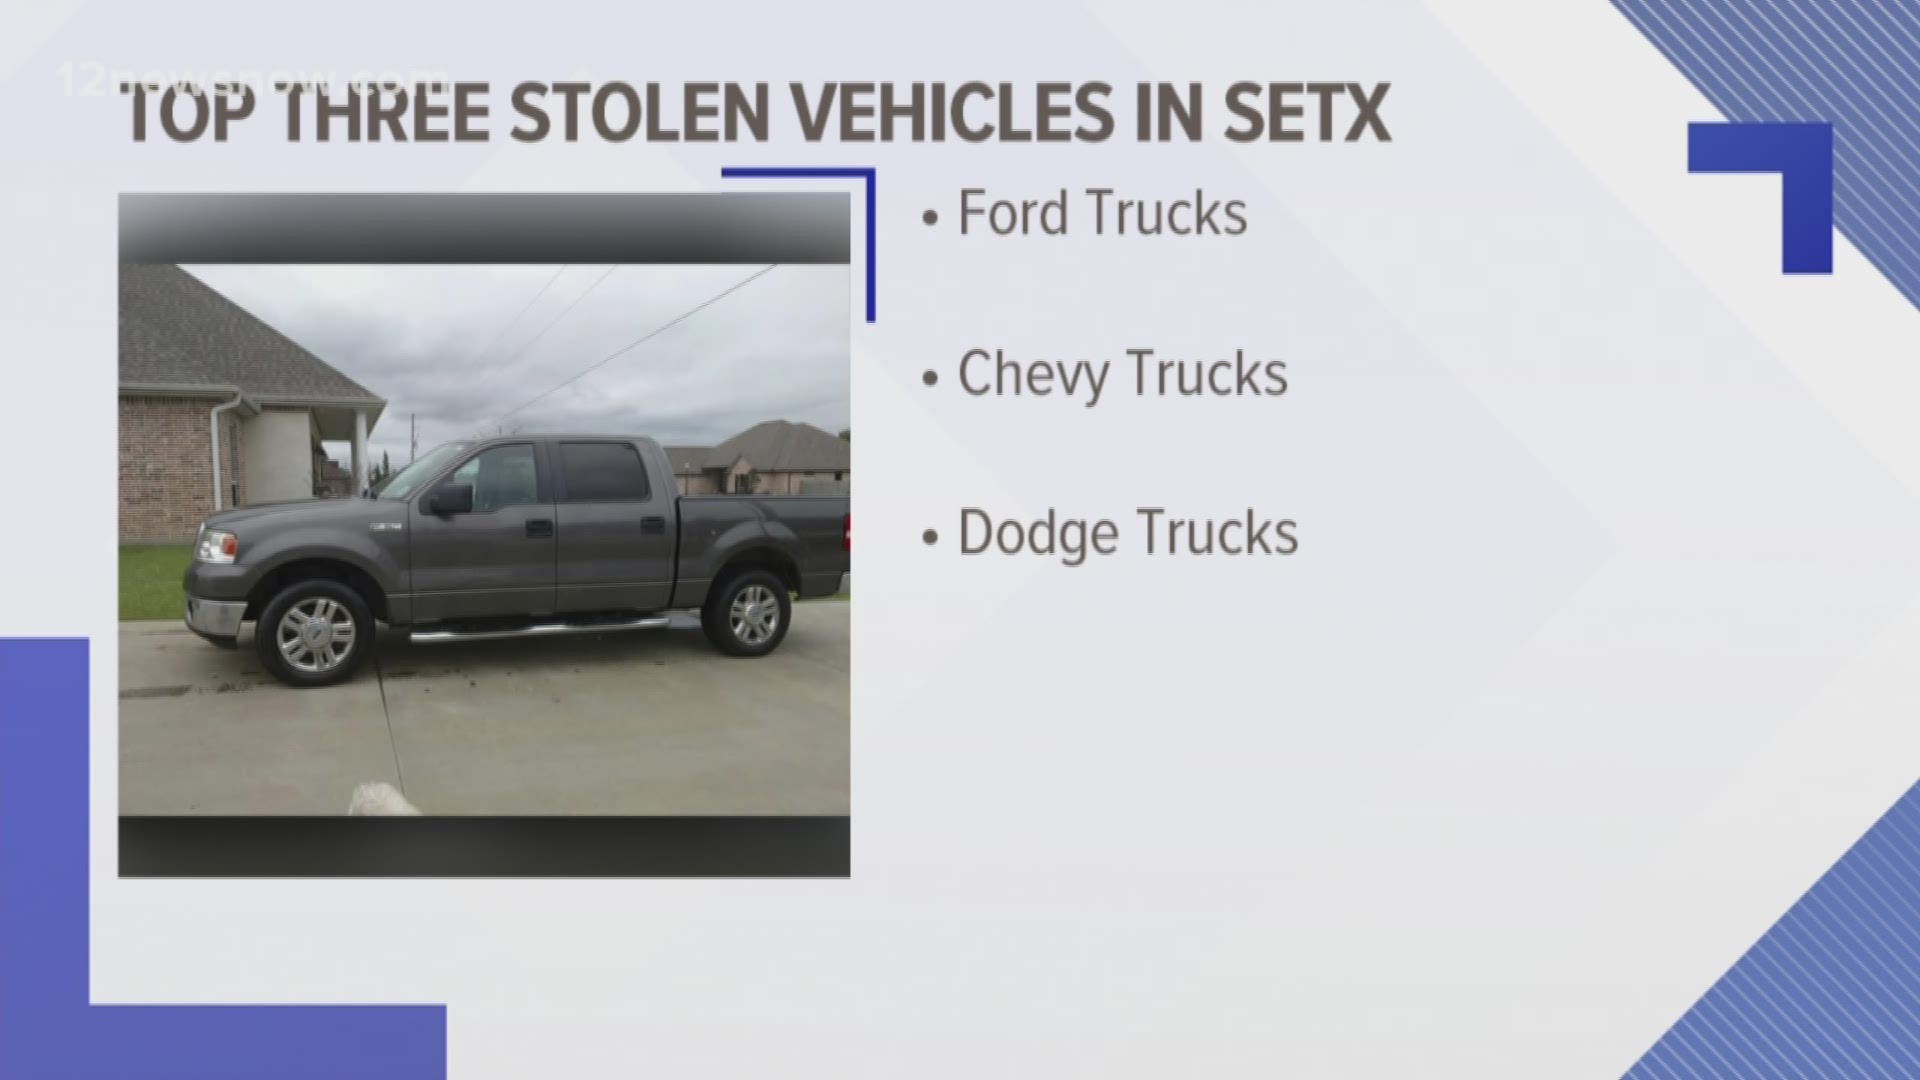 She says she took items from a vehicle in her friend's auto shop because the door was unlocked.